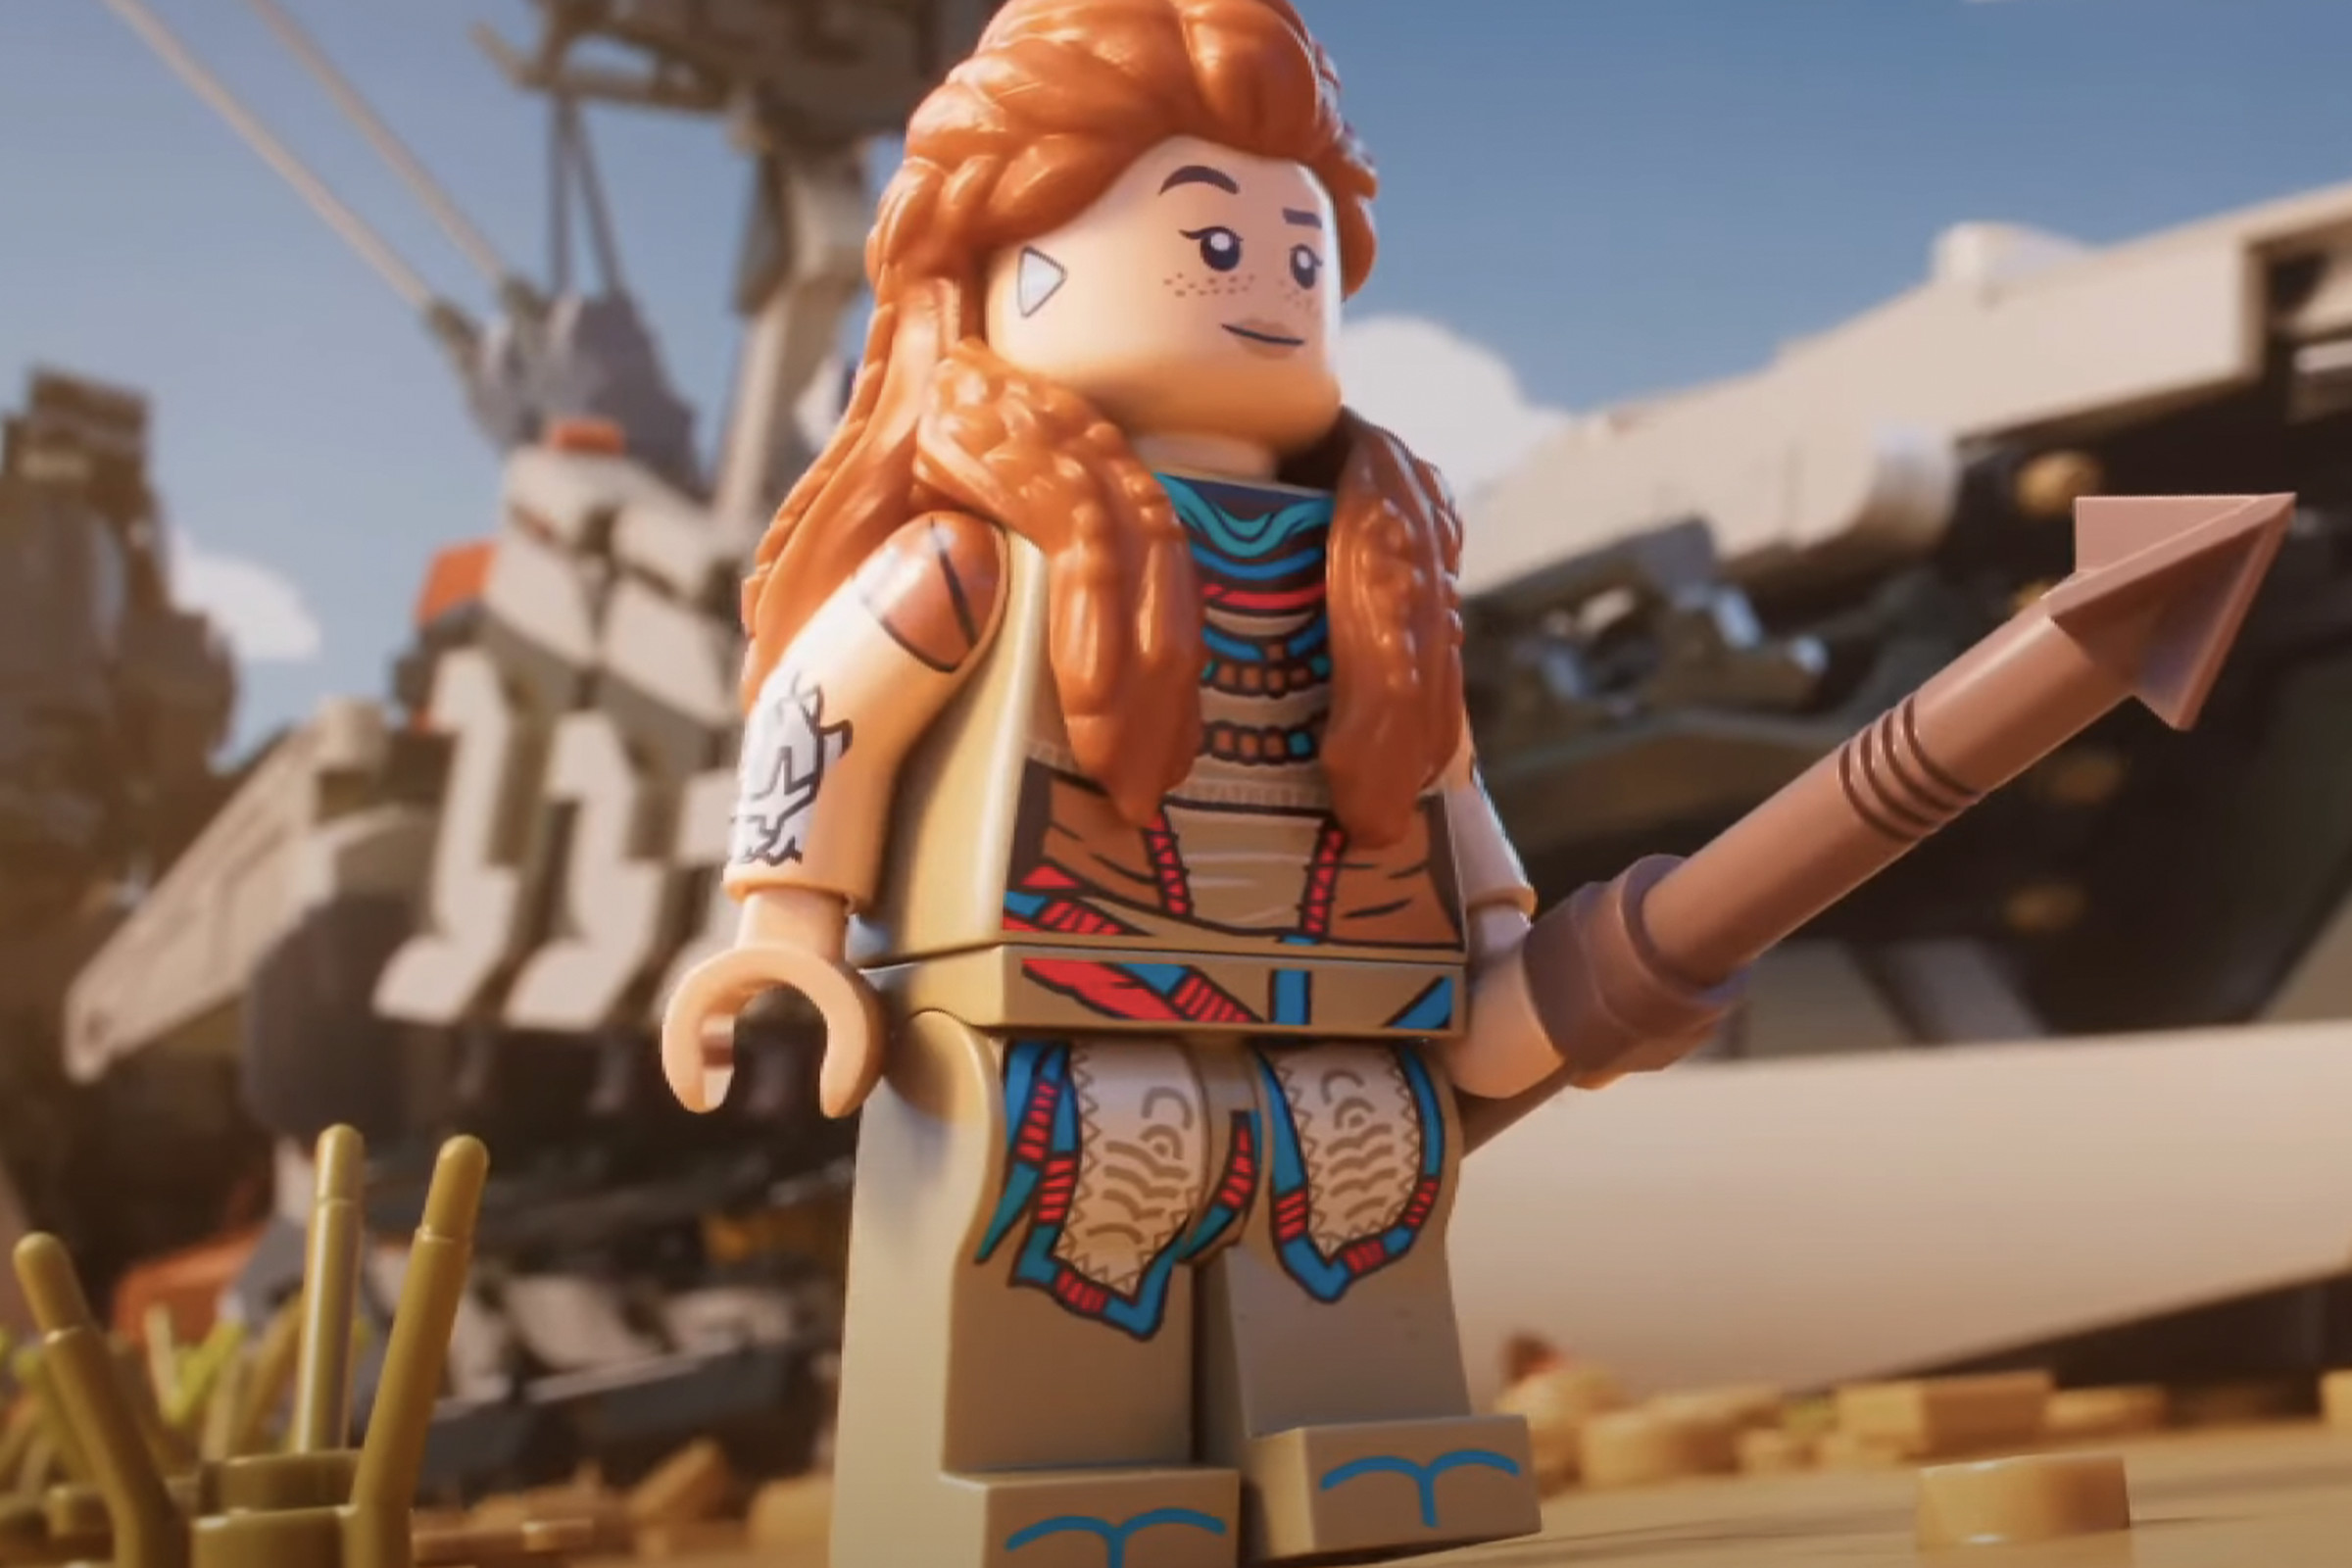 A screenshot from the video game Lego Horizon Adventures.